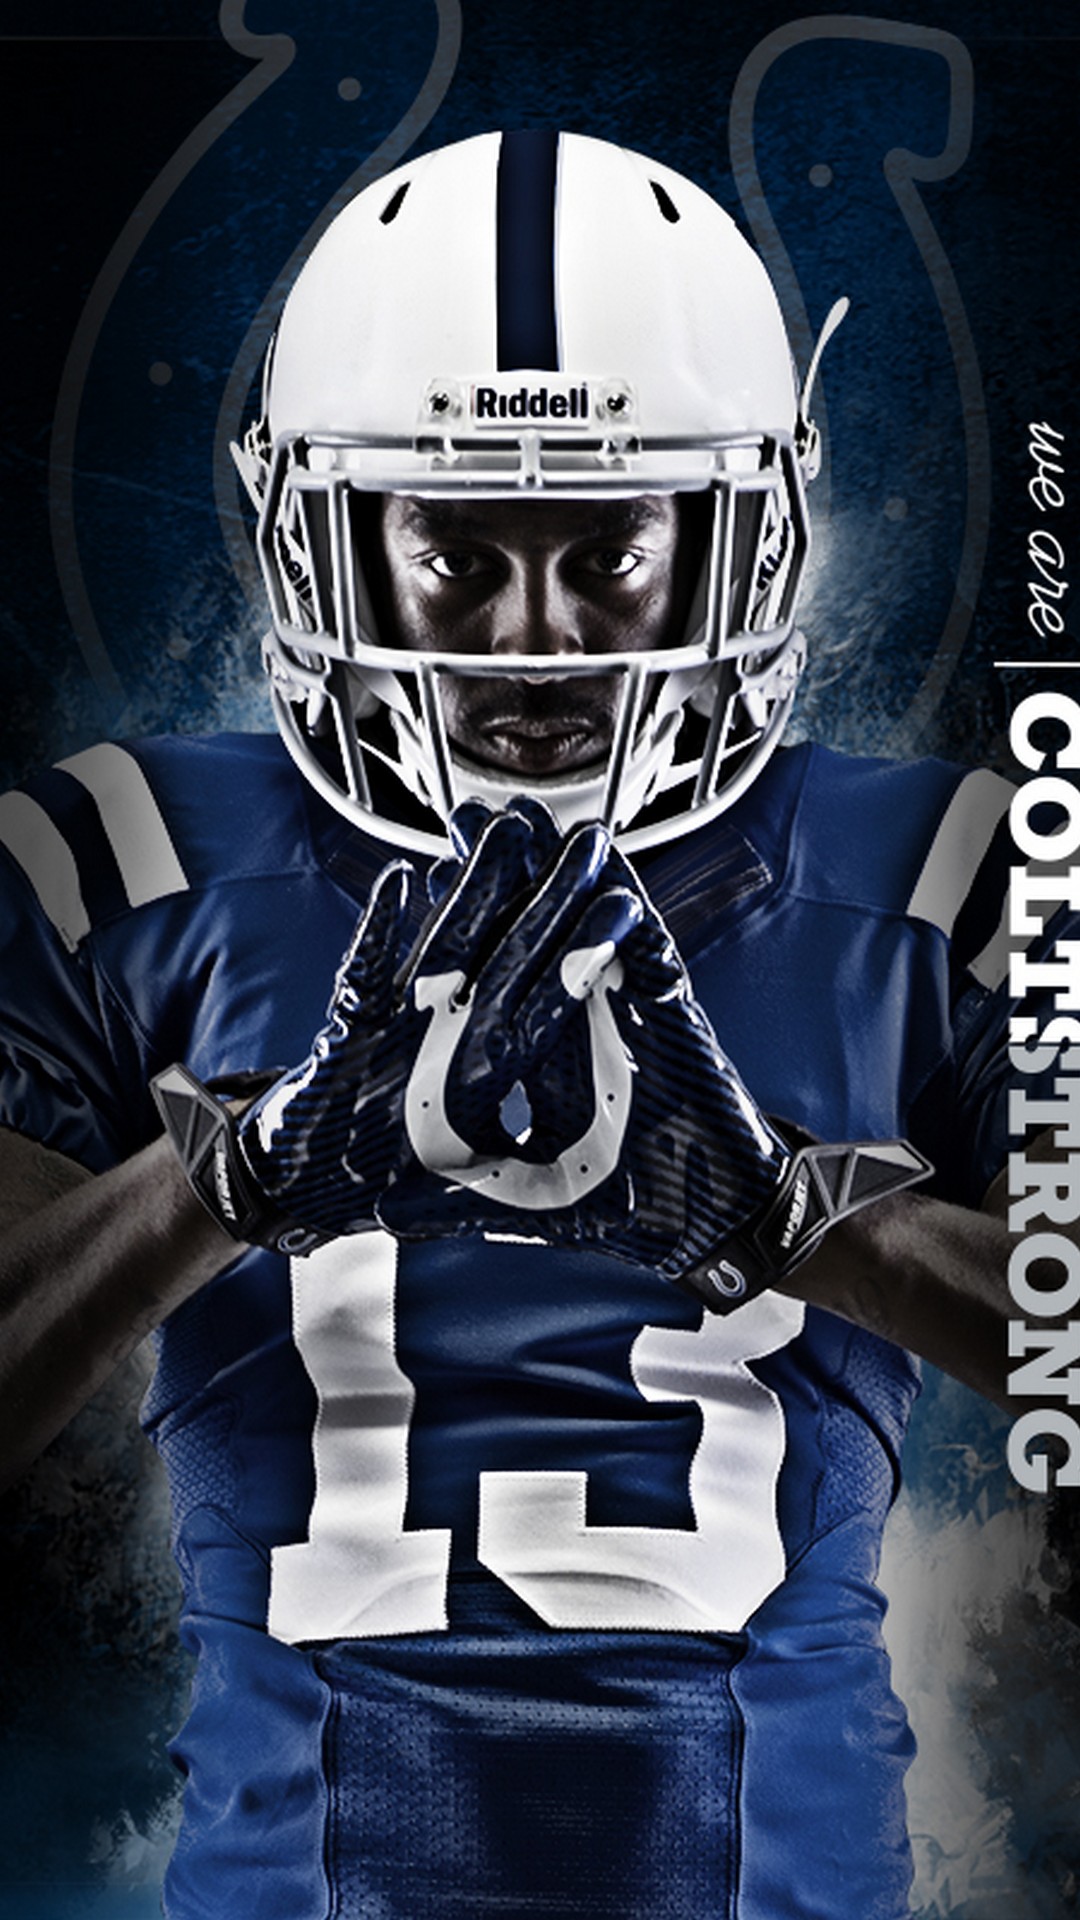 Indianapolis Colts iPhone 7 Wallpaper With high-resolution 1080X1920 pixel. Download and set as wallpaper for Desktop Computer, Apple iPhone X, XS Max, XR, 8, 7, 6, SE, iPad, Android